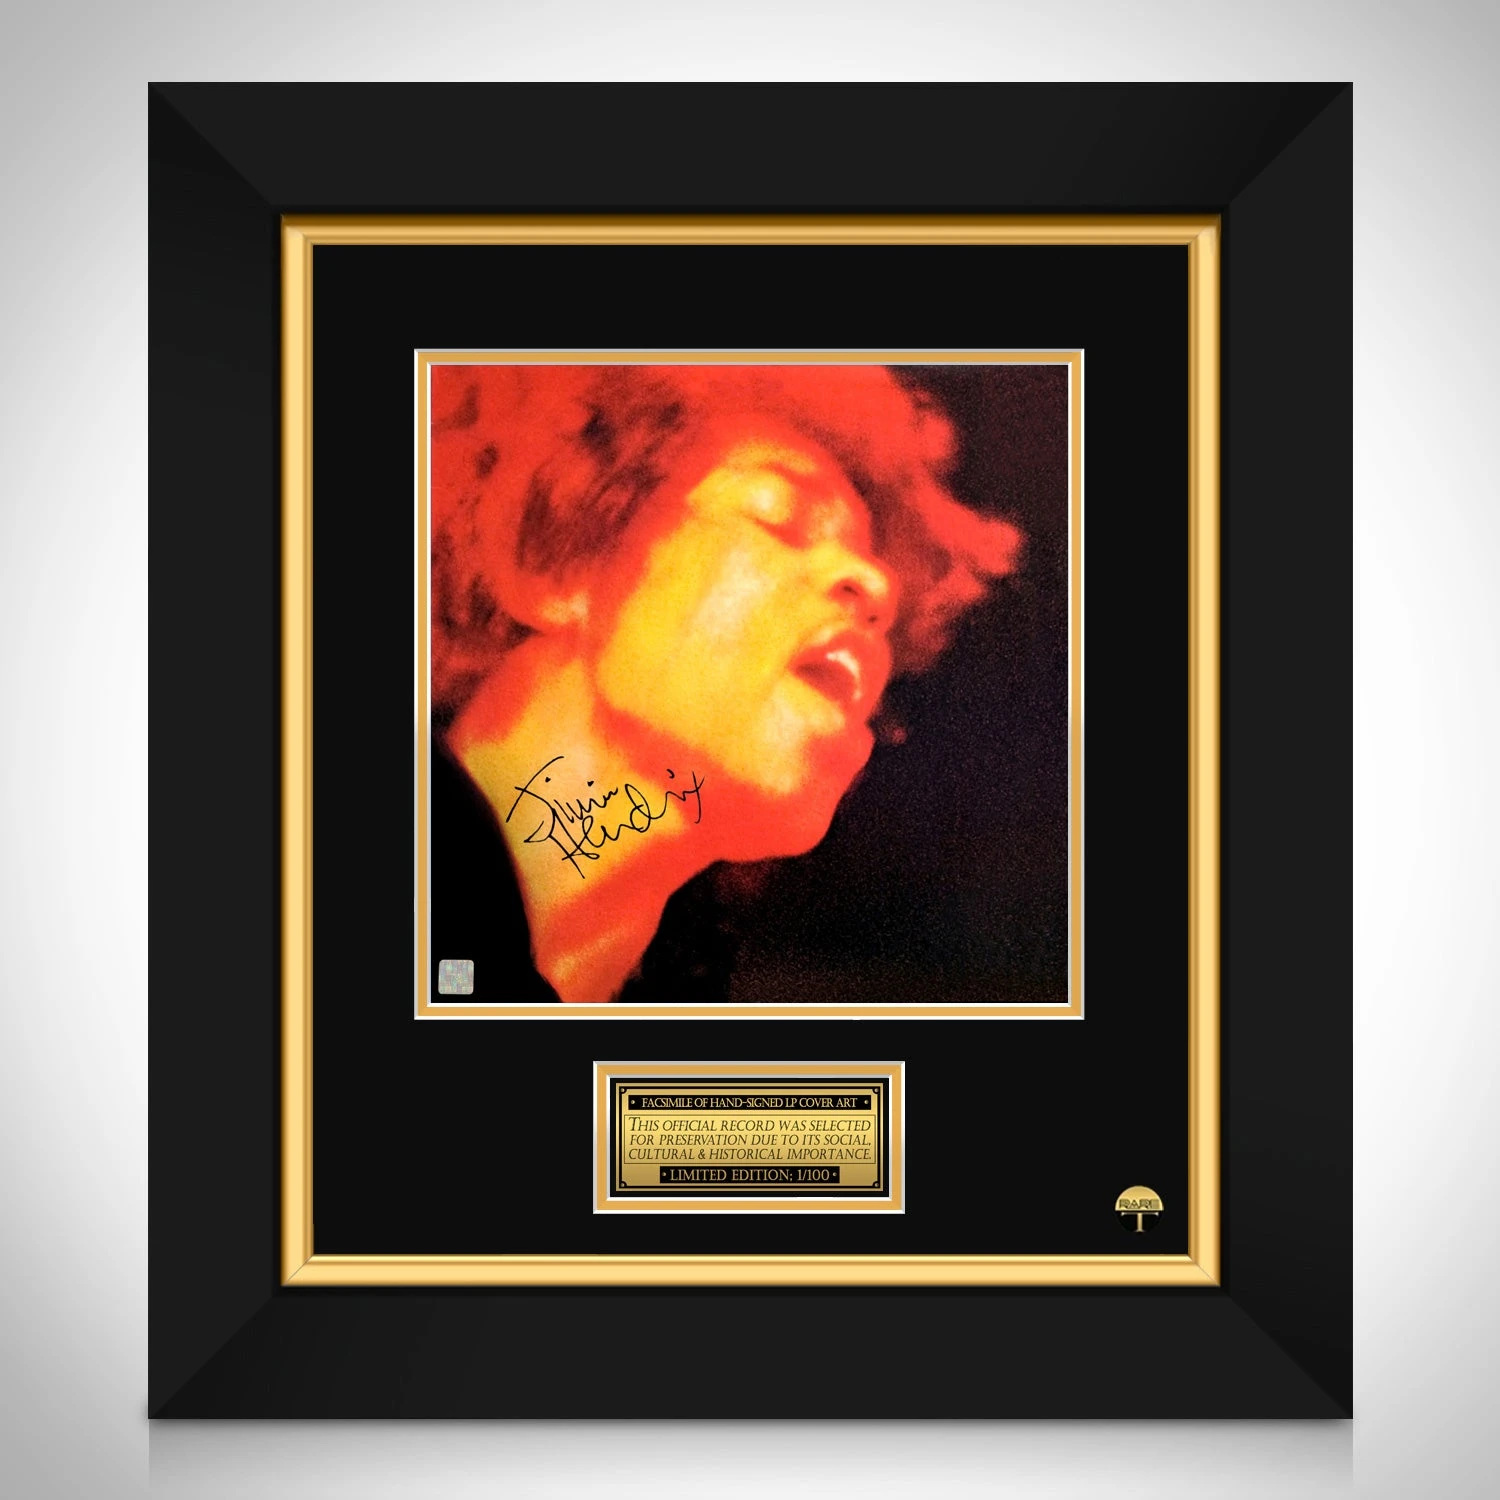 Hendrix ladyland signature edition lp cover frame thumb200